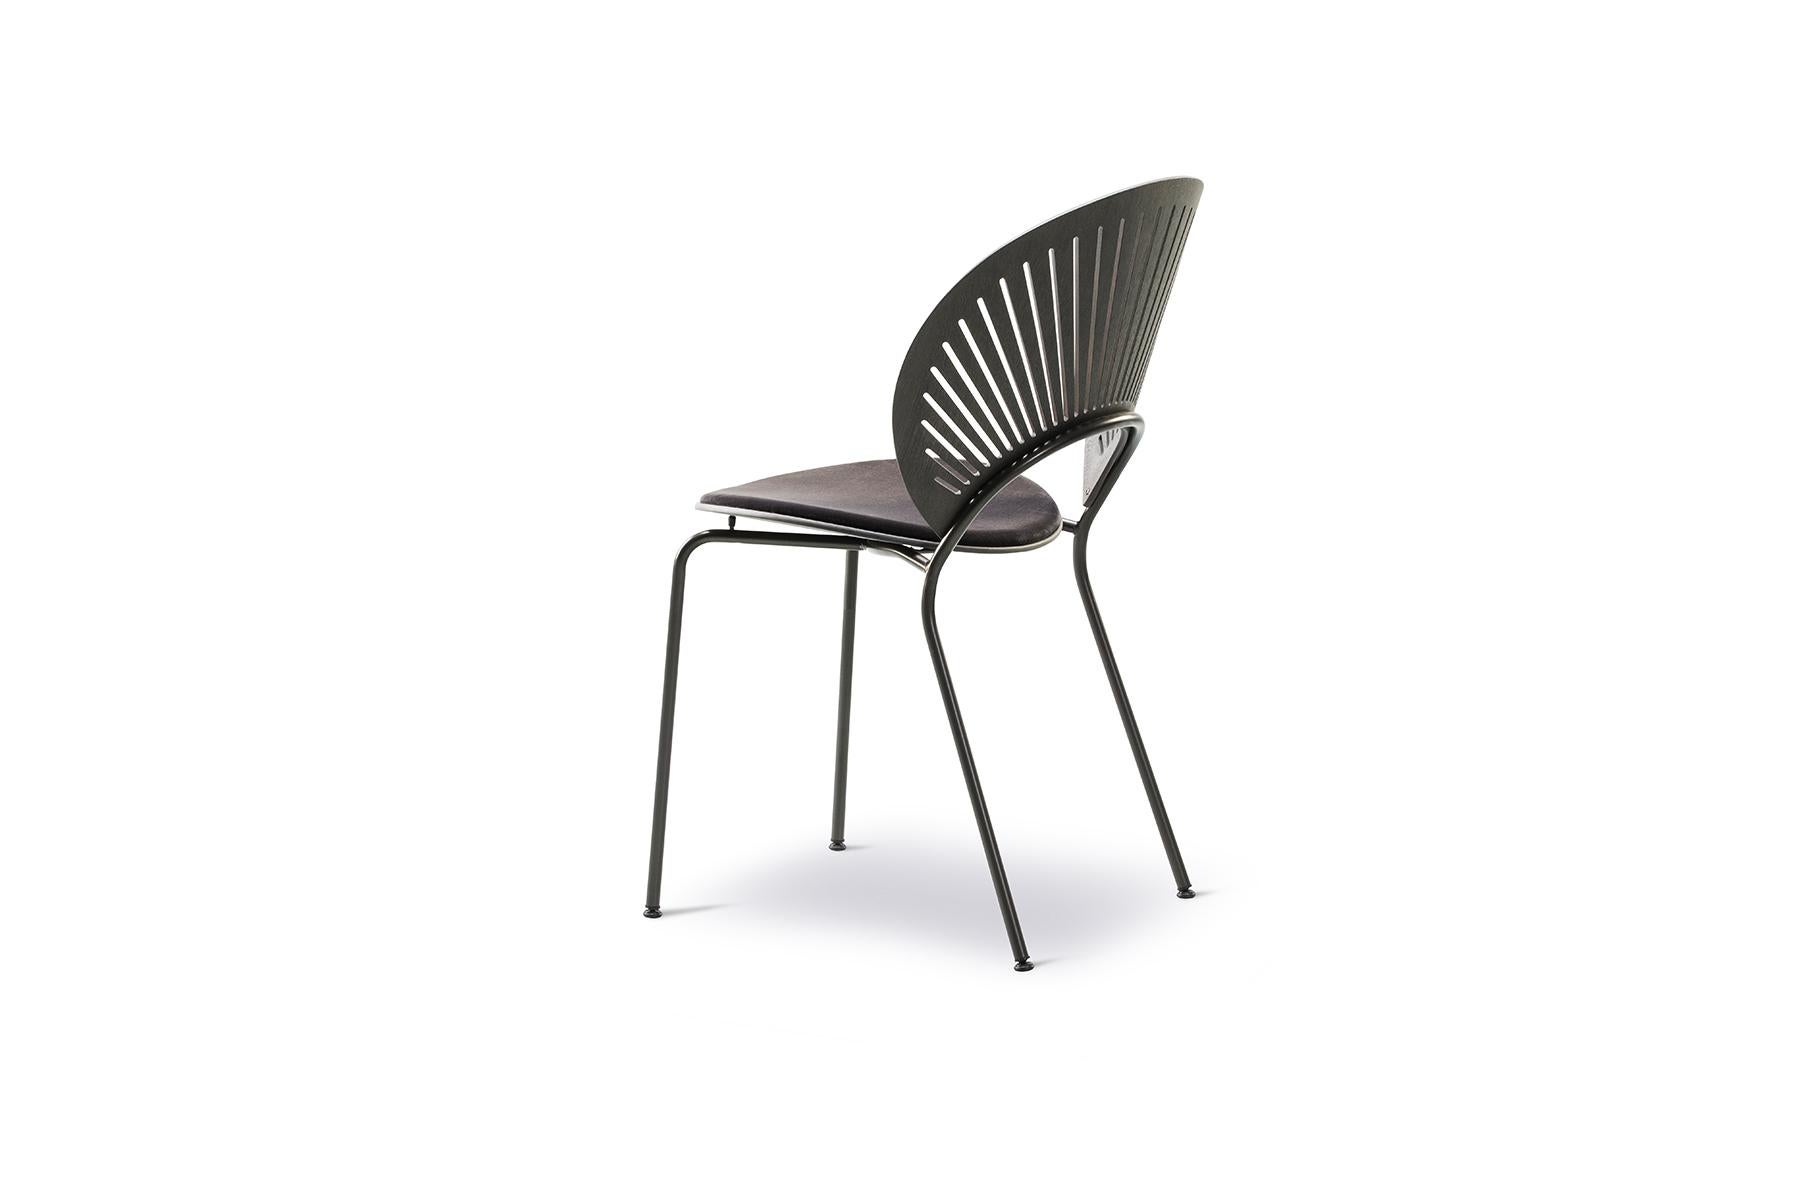 Nanna Ditzel Trinidad chair, seat upholstered the precise transparency of the Trinidad chair almost dissolves in a play of light and shadow, yet at the same time gives the chair a strikingly bold voice. The chair without arms is stackable and comes